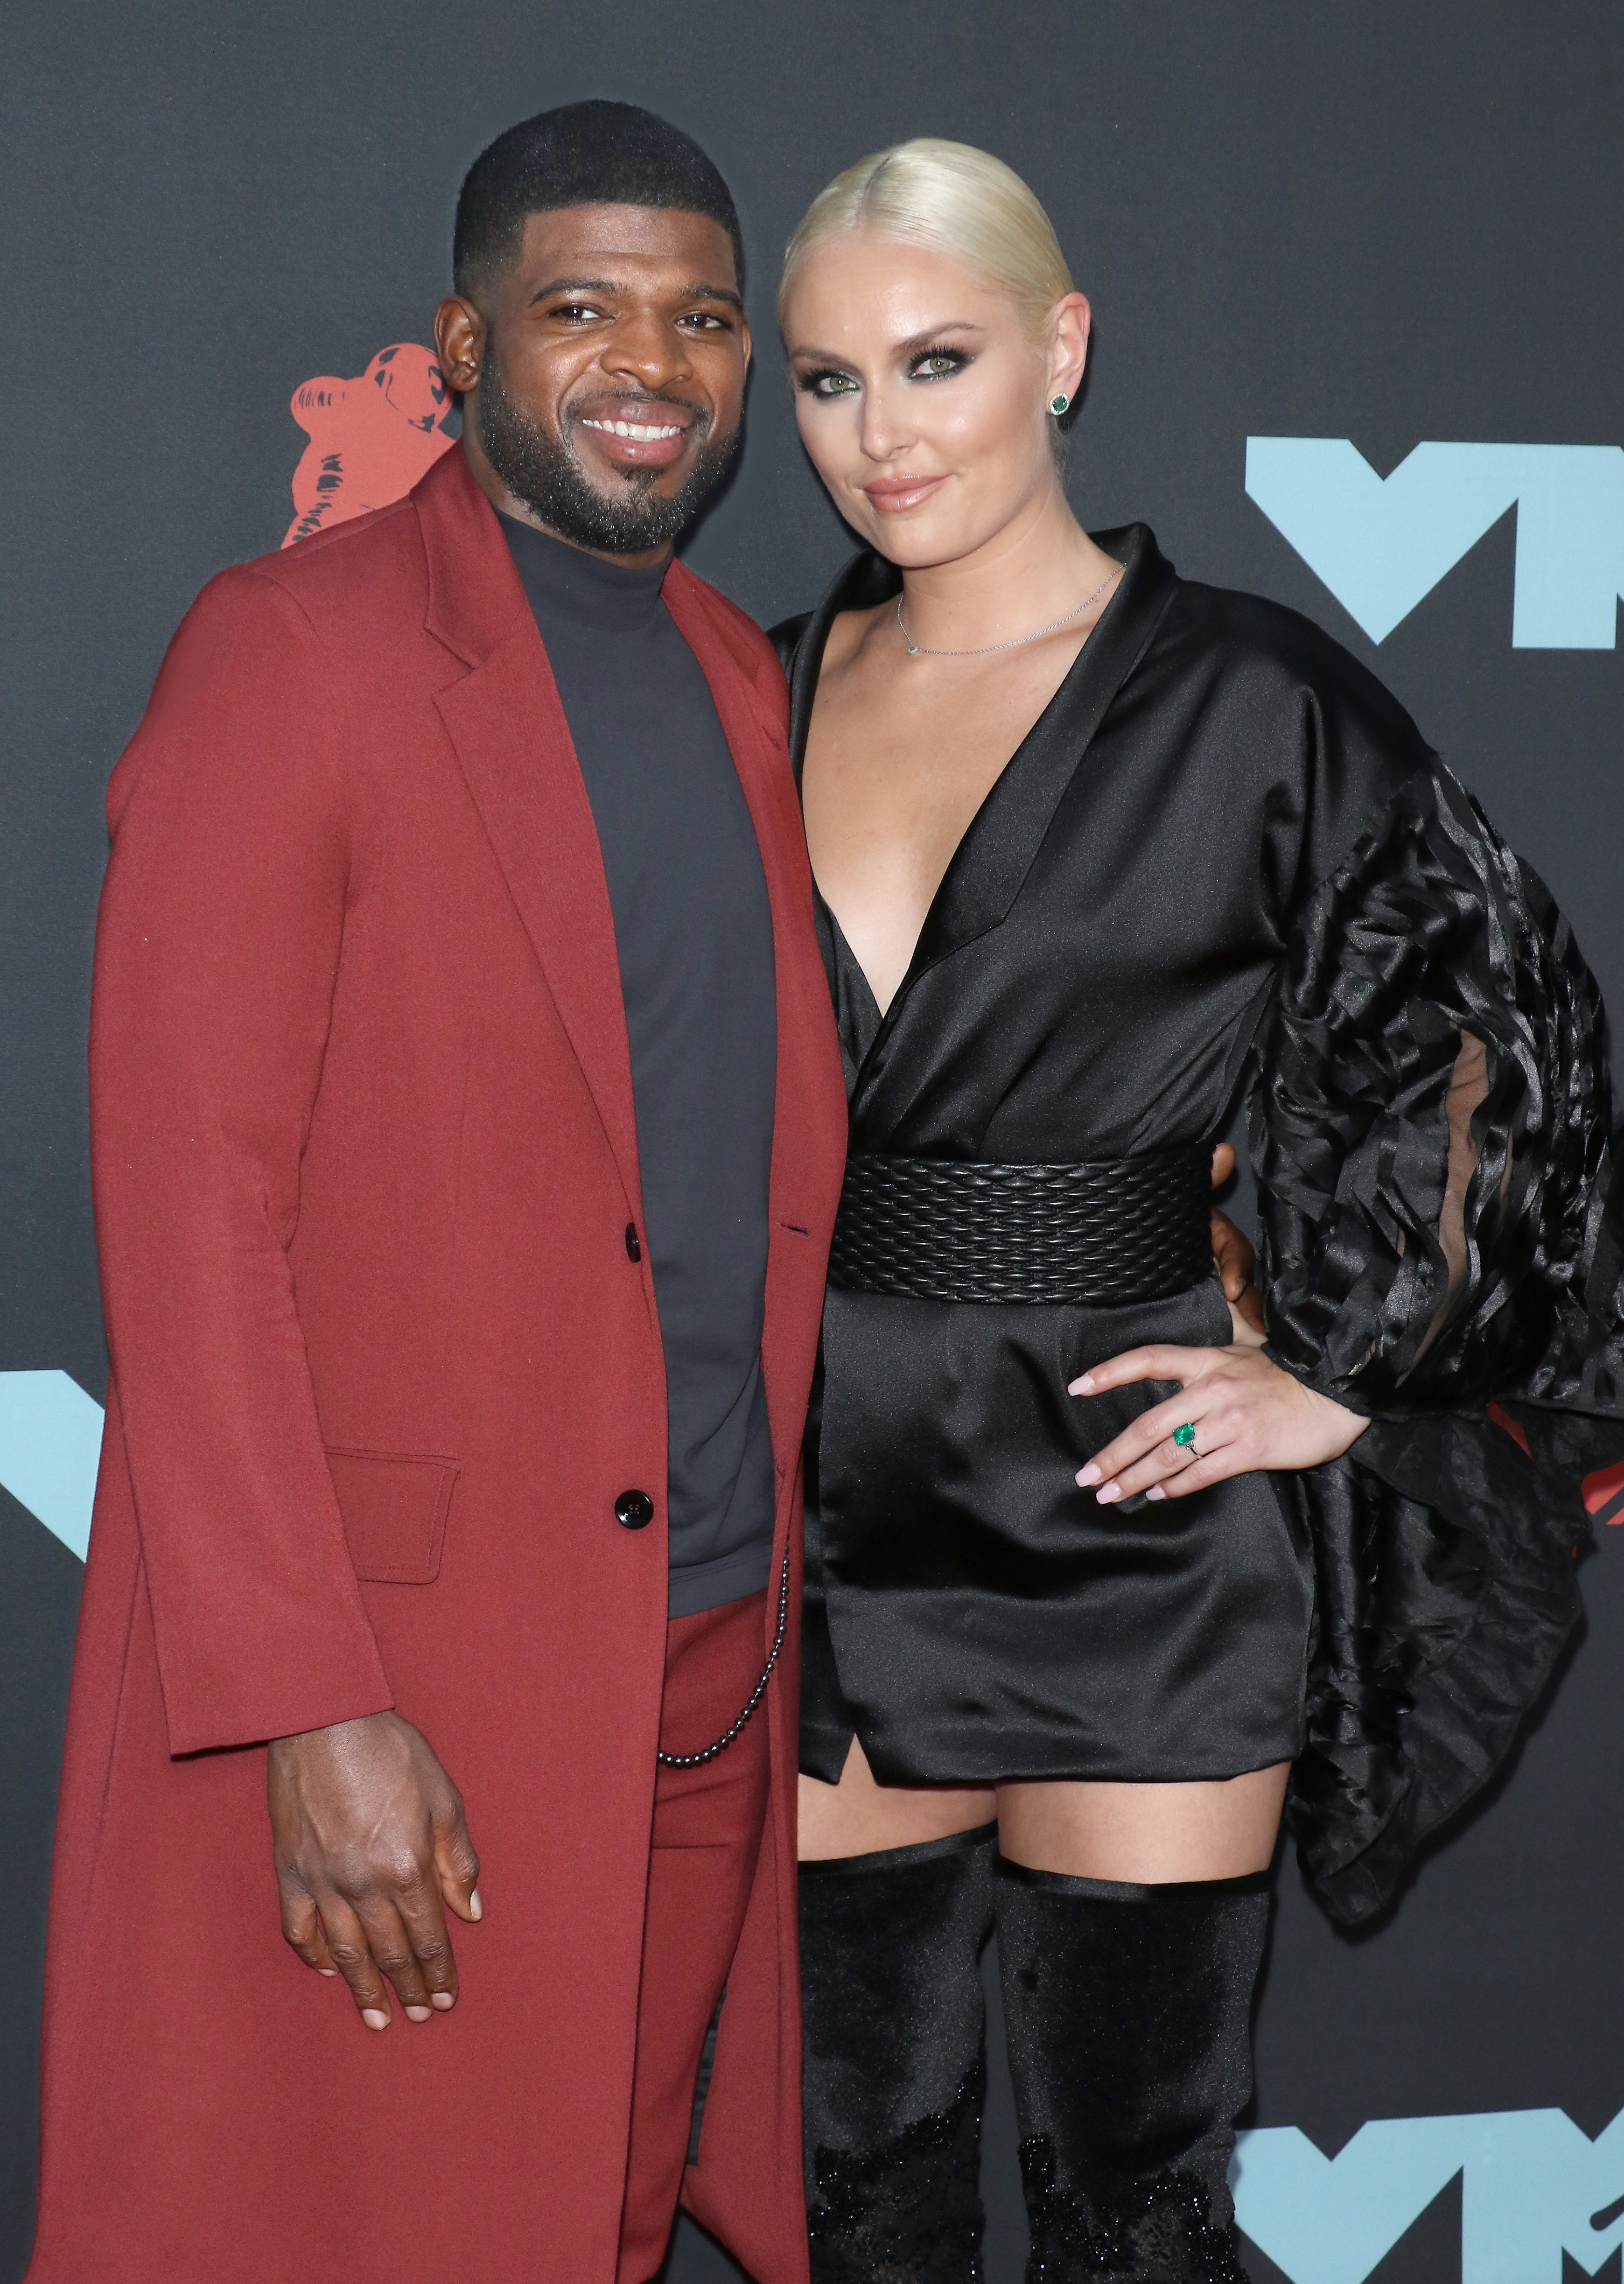 Two celebrities posing together; man in a red coat and woman in a black dress with ruffled sleeve